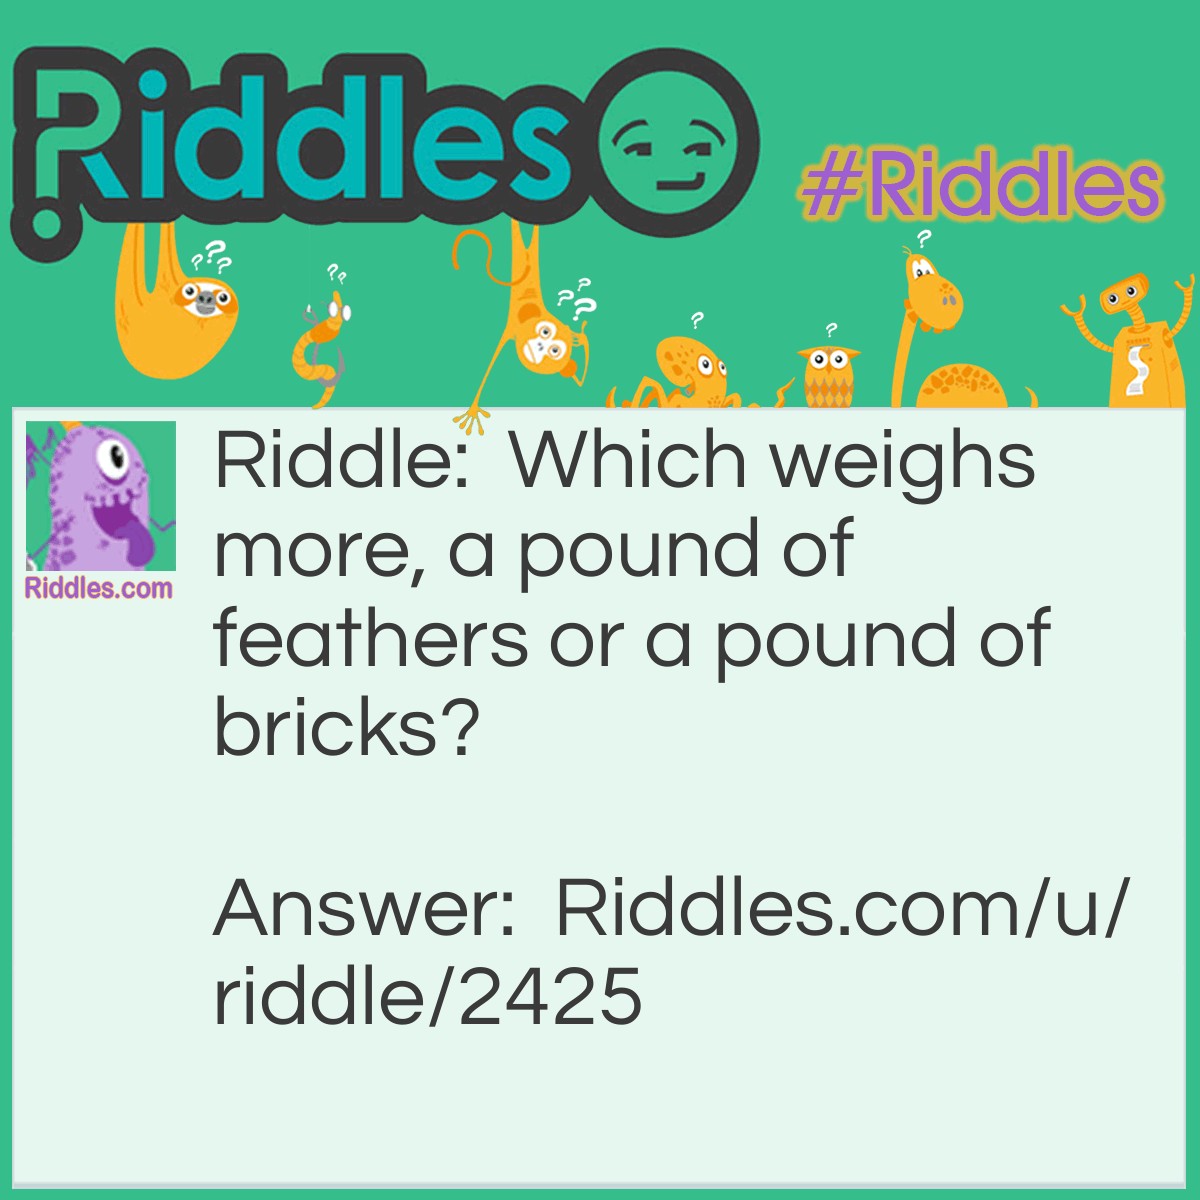 Riddle: Which weighs more, a pound of feathers or a pound of bricks? Answer: Neither, they both weigh one pound.